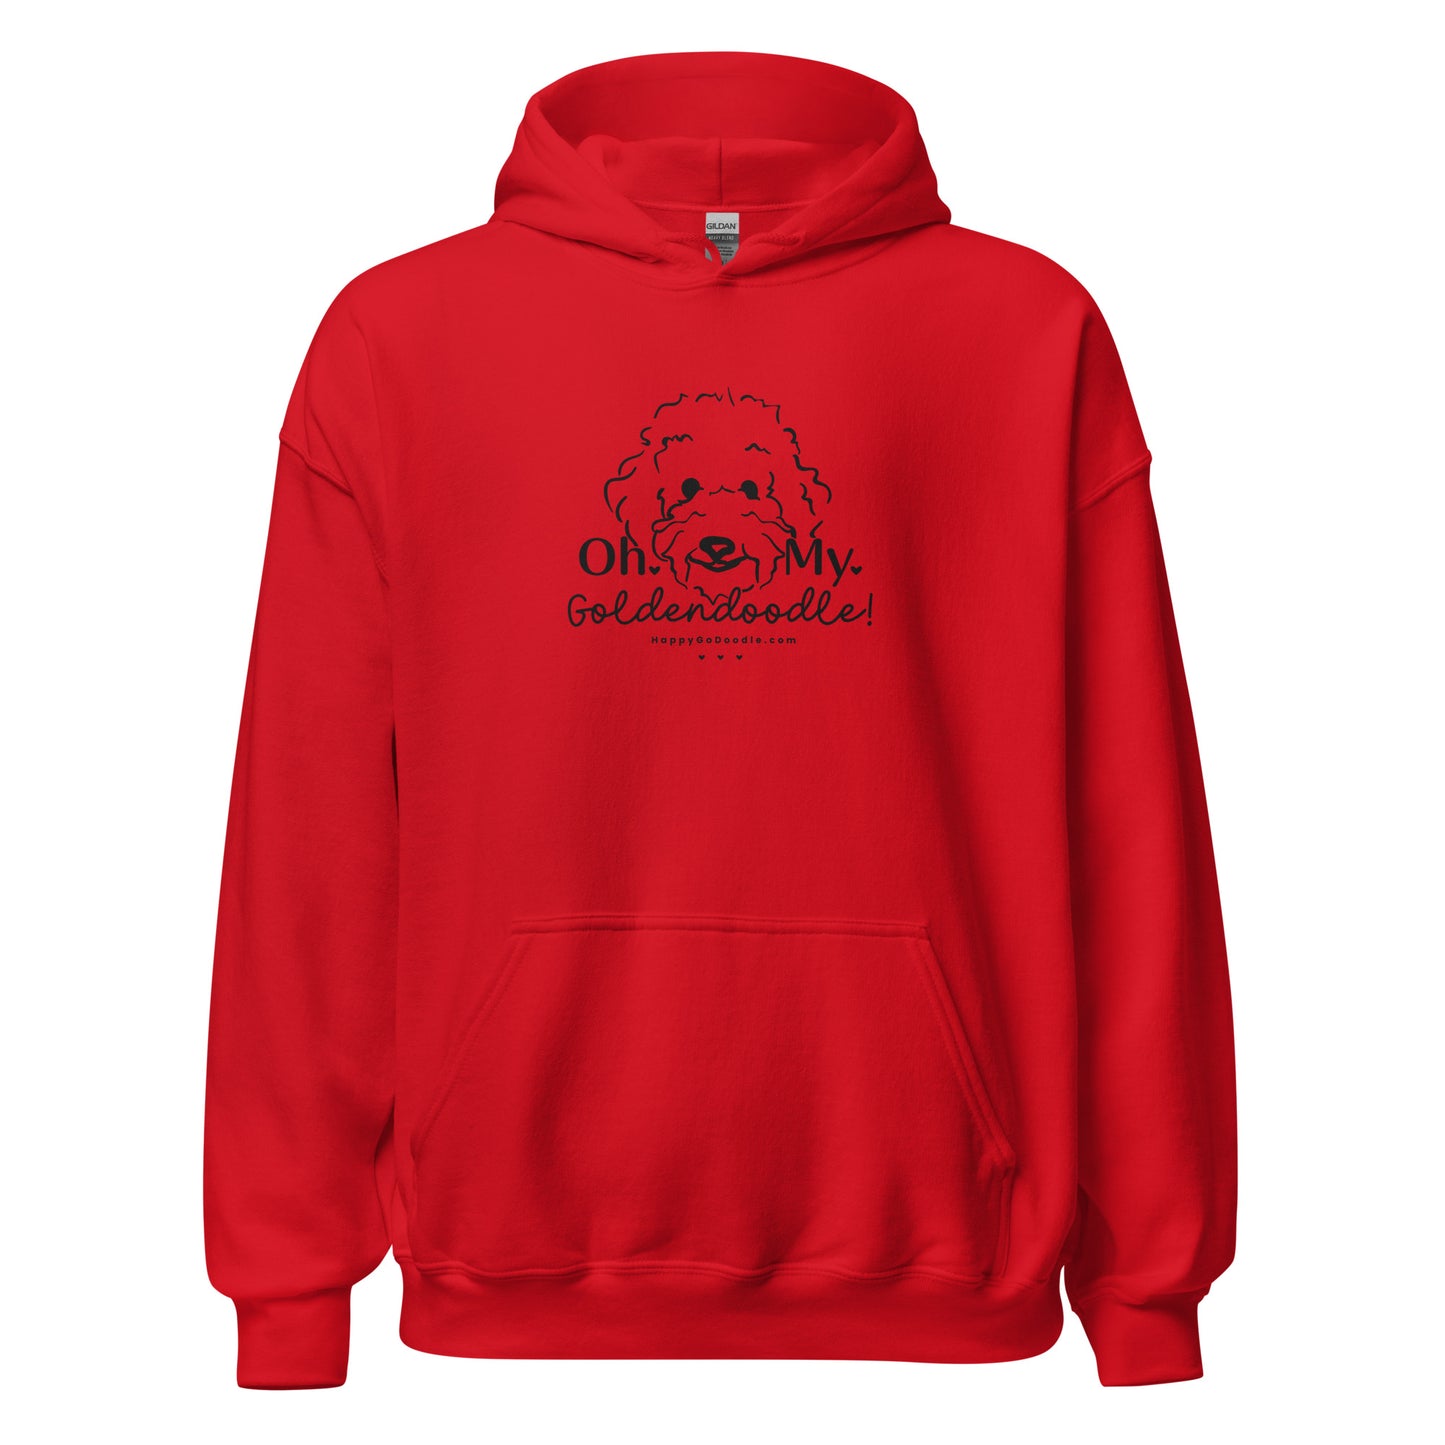 Goldendoodle hoodie with Goldendoodle face and words "Oh My Goldendoodle" in red color